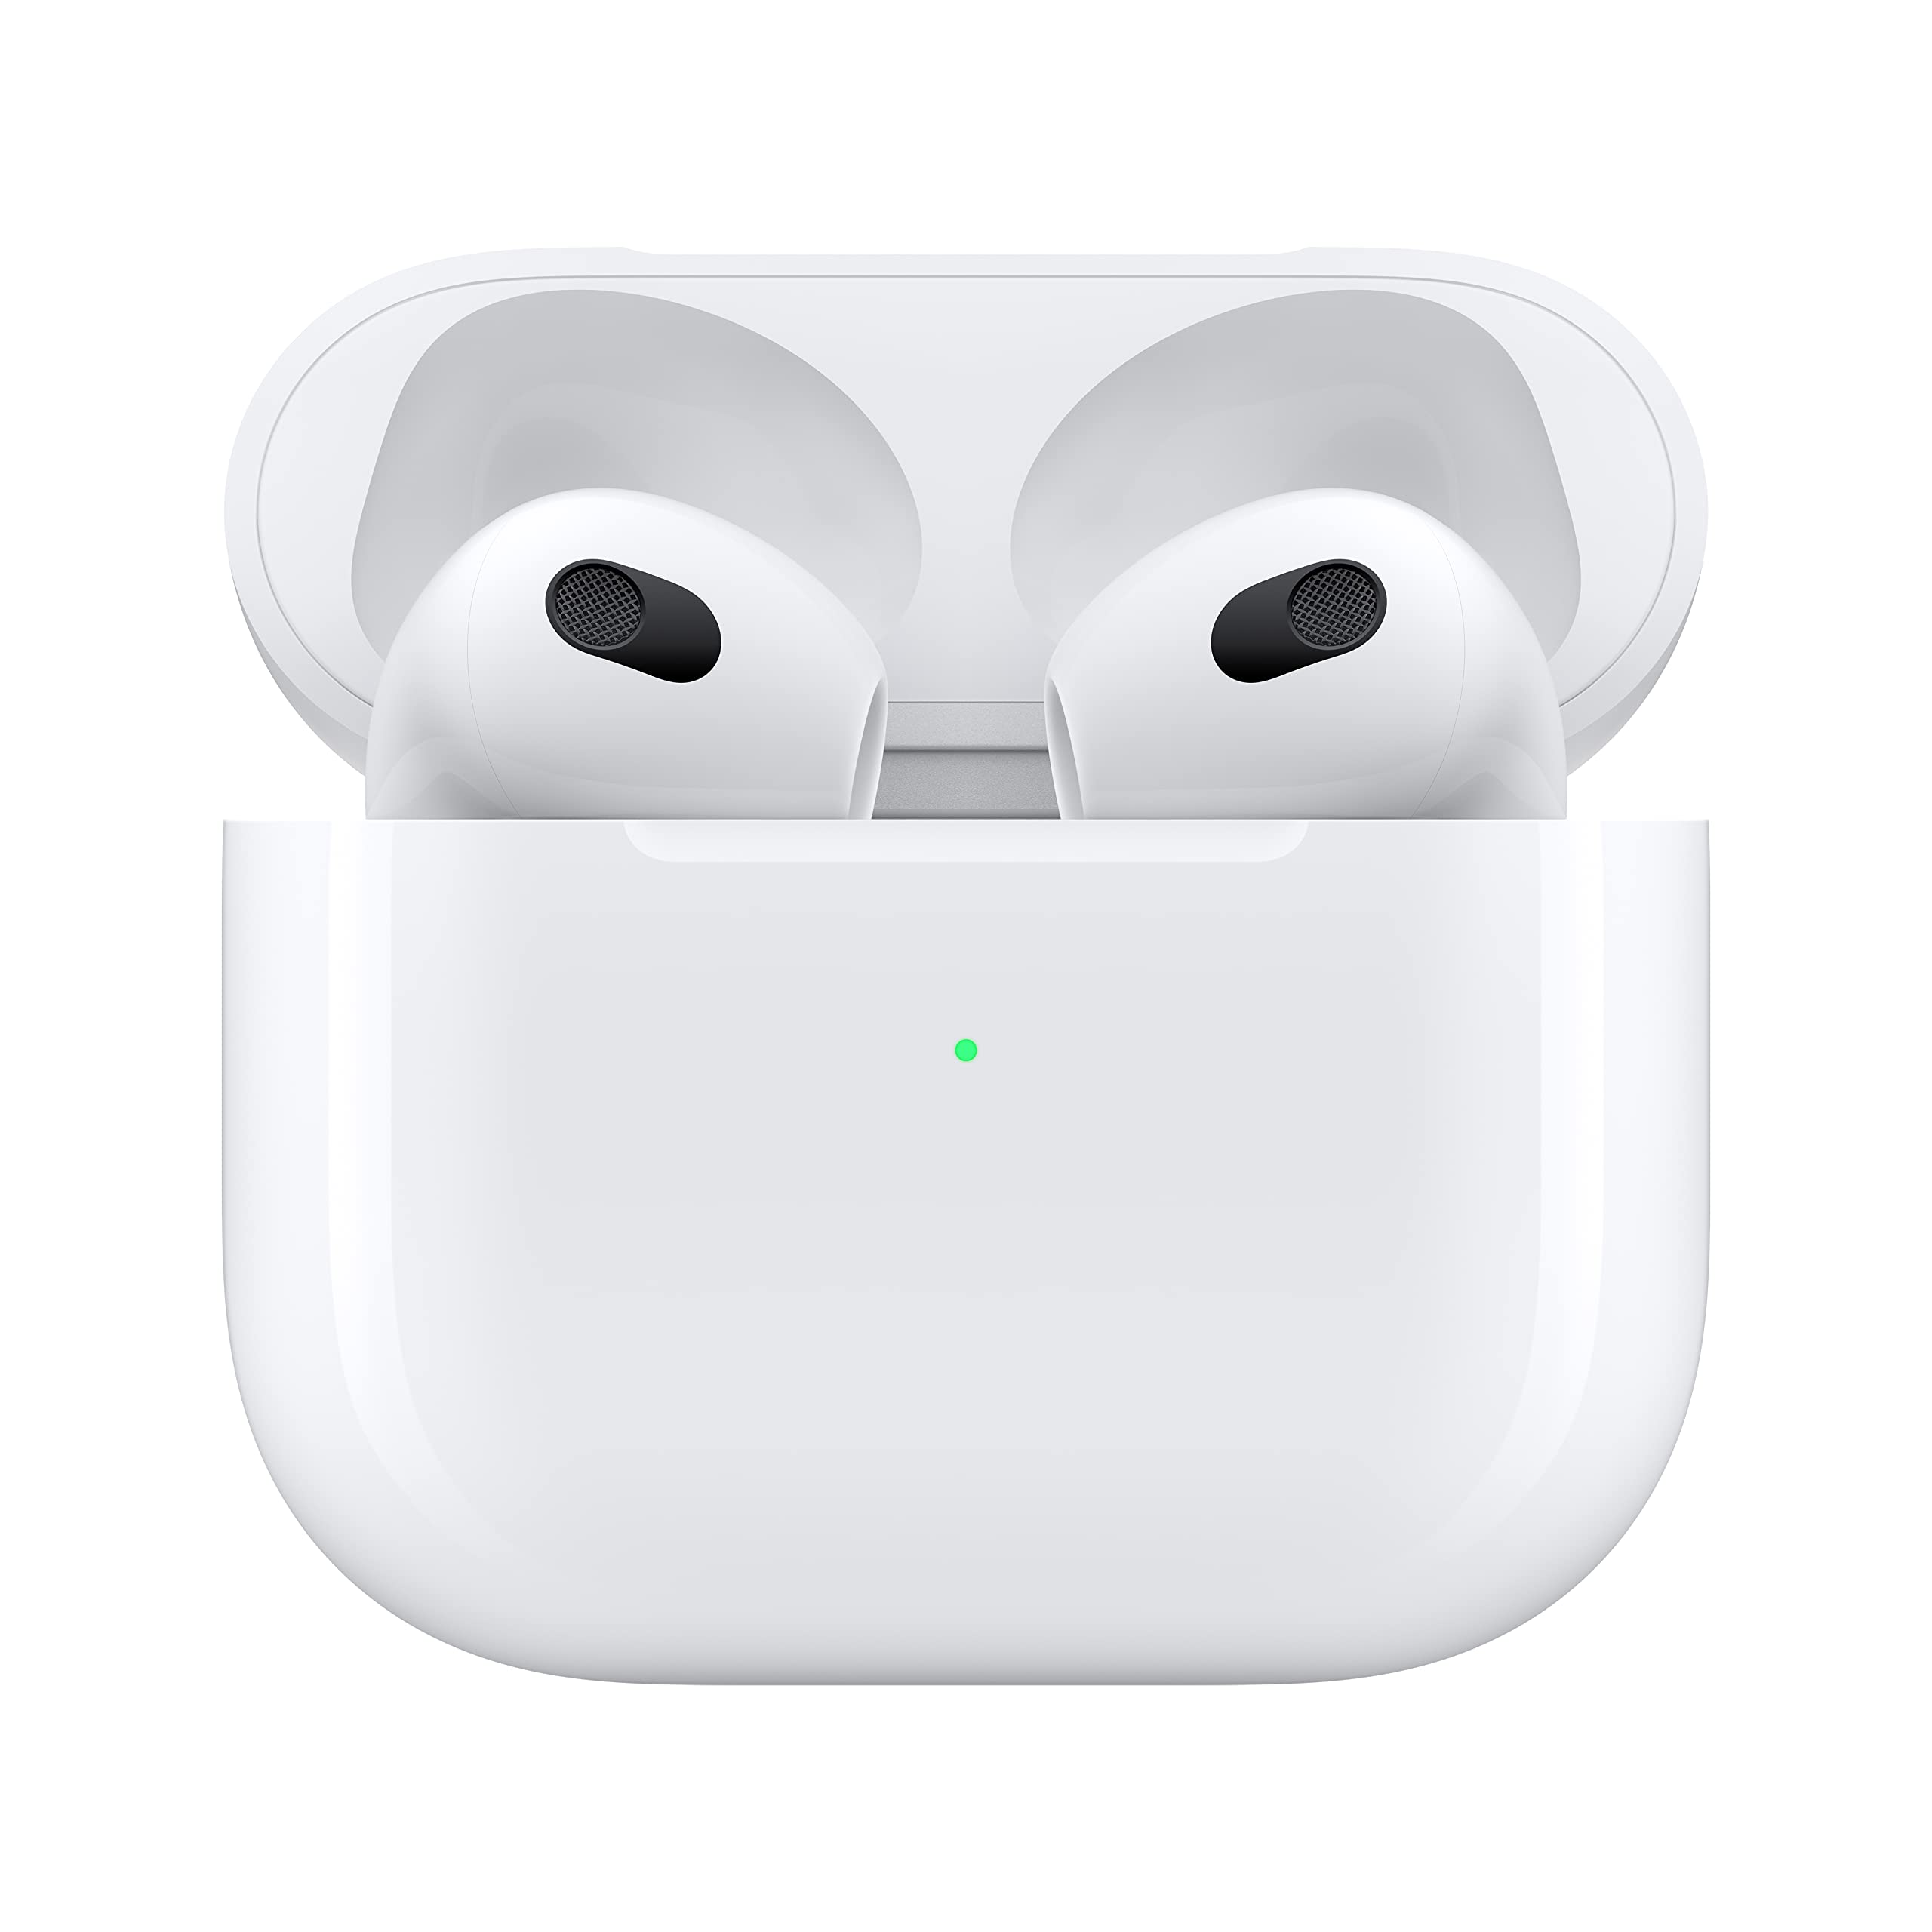 Apple AirPods (3rd Generation) Wireless Earbuds with Lightning Charging Case. Spatial Audio, Sweat and Water Resistant, Up to 30 Hours of Battery Life. Bluetooth Headphones for iPhone